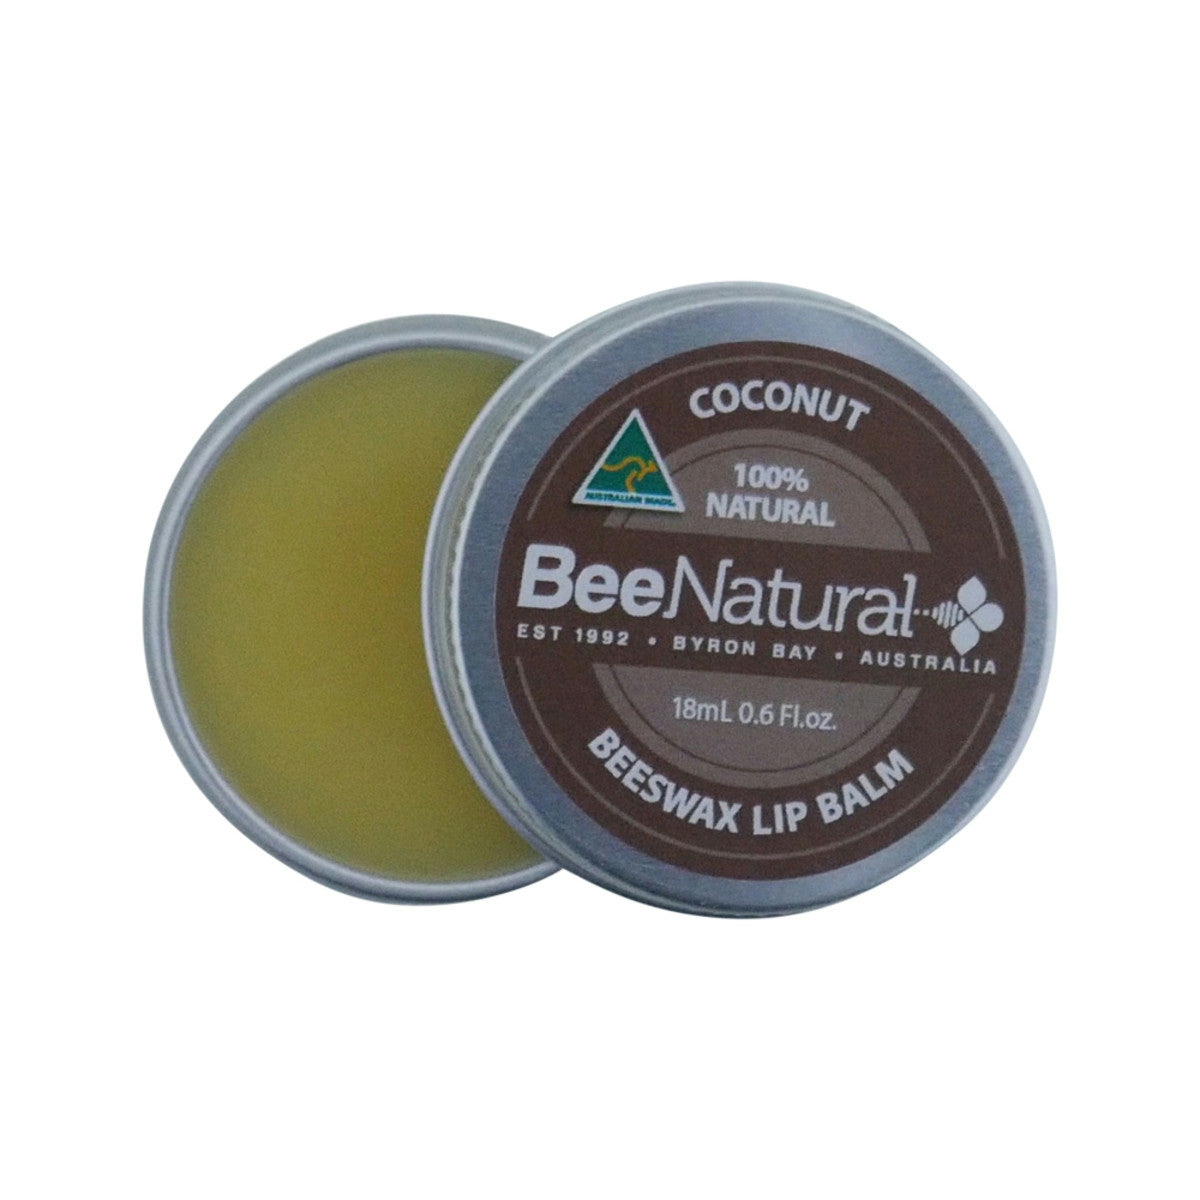 image of Bee Natural Lip Balm Tin coconut 18ml on white background